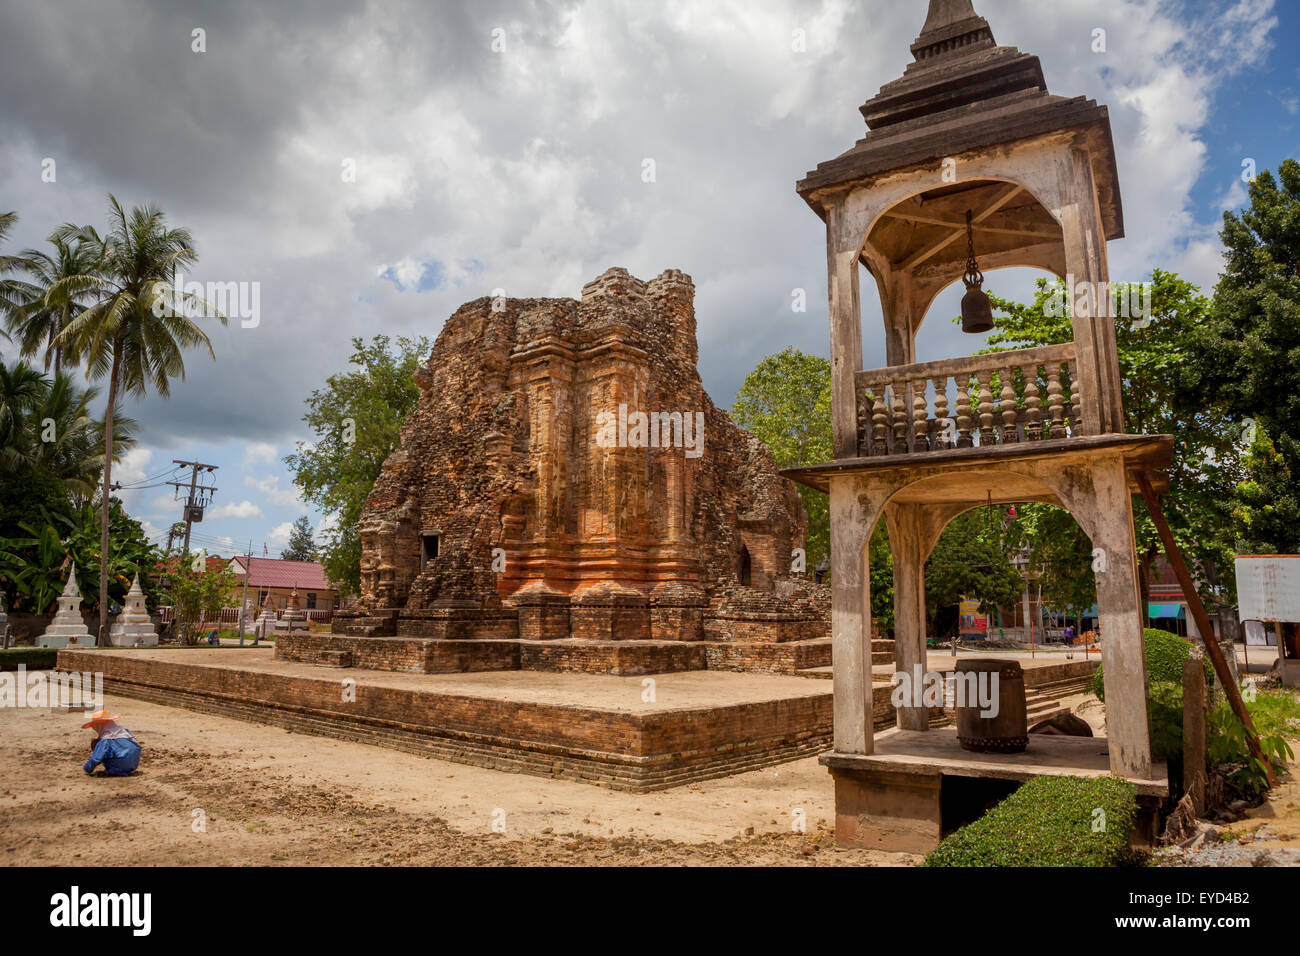 Wat Kaew temple in Chaiya, Southern Thailand. Stock Photo